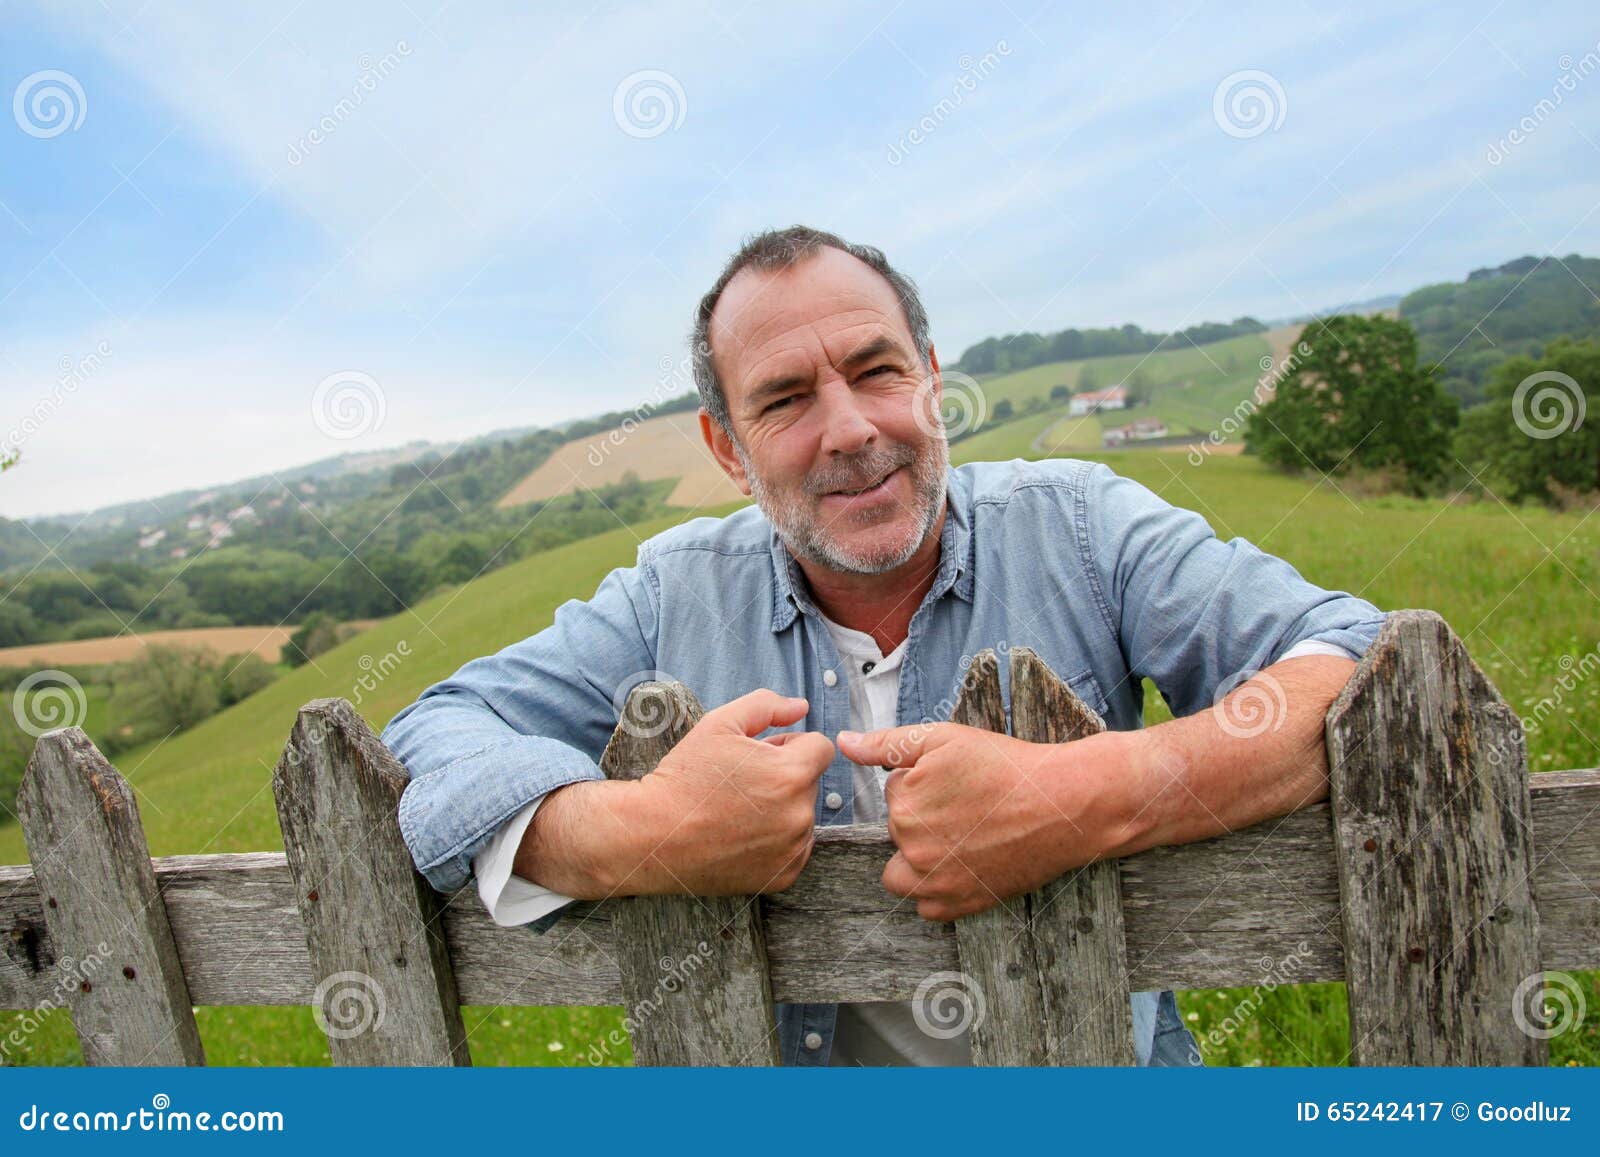 smiling farmer standing by fence